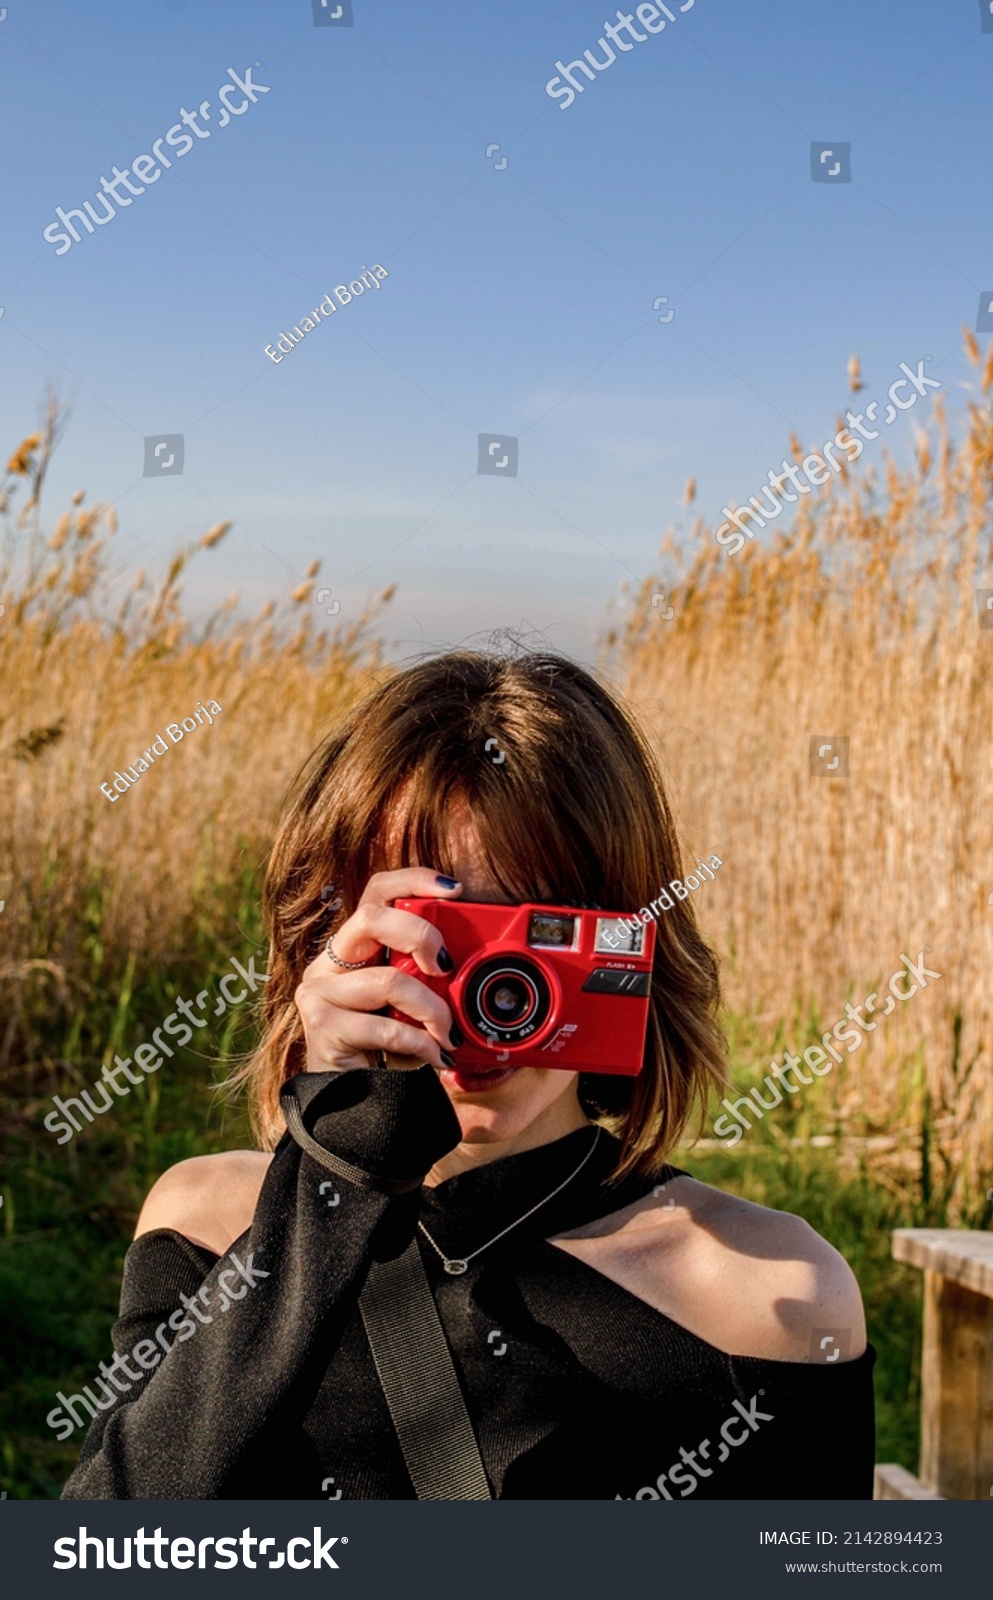 Vertical Photo of a Short-haired Girl Taking a Picture with a Red Retro Compact Camera in a Rice field with Tall Plants Background #2142894423